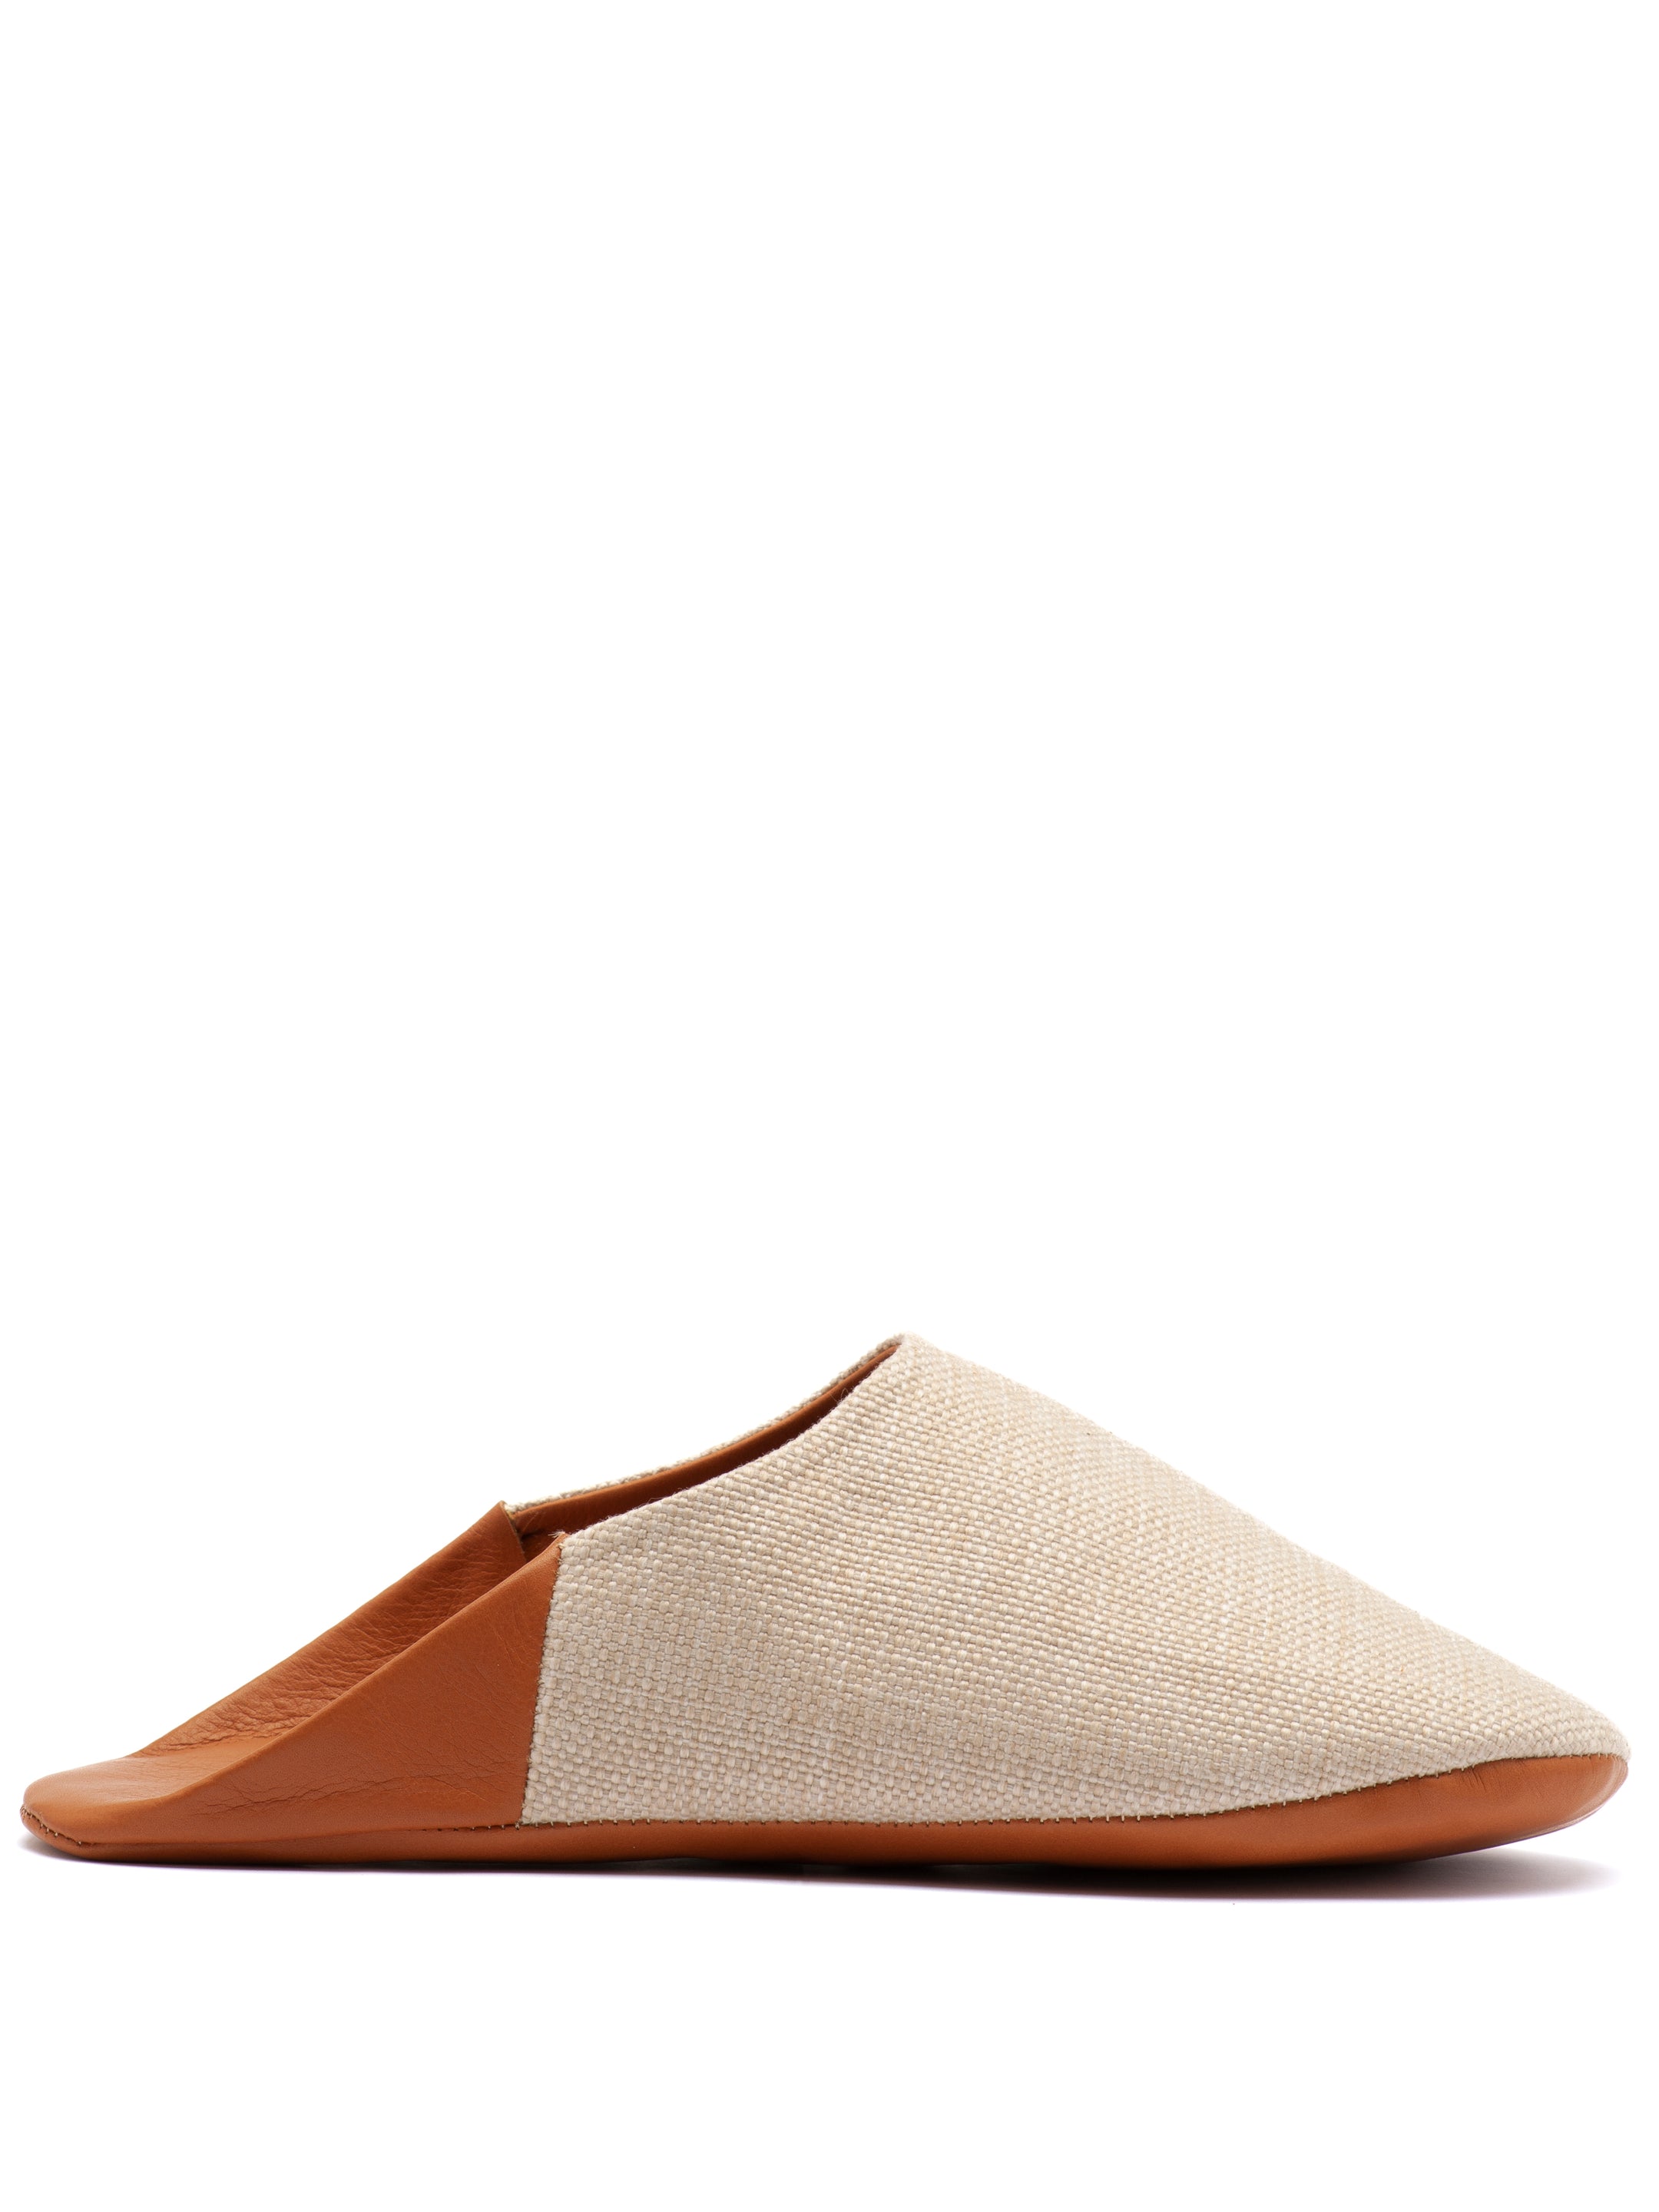 Russet Linen Blend - Leather & Textile Slippers